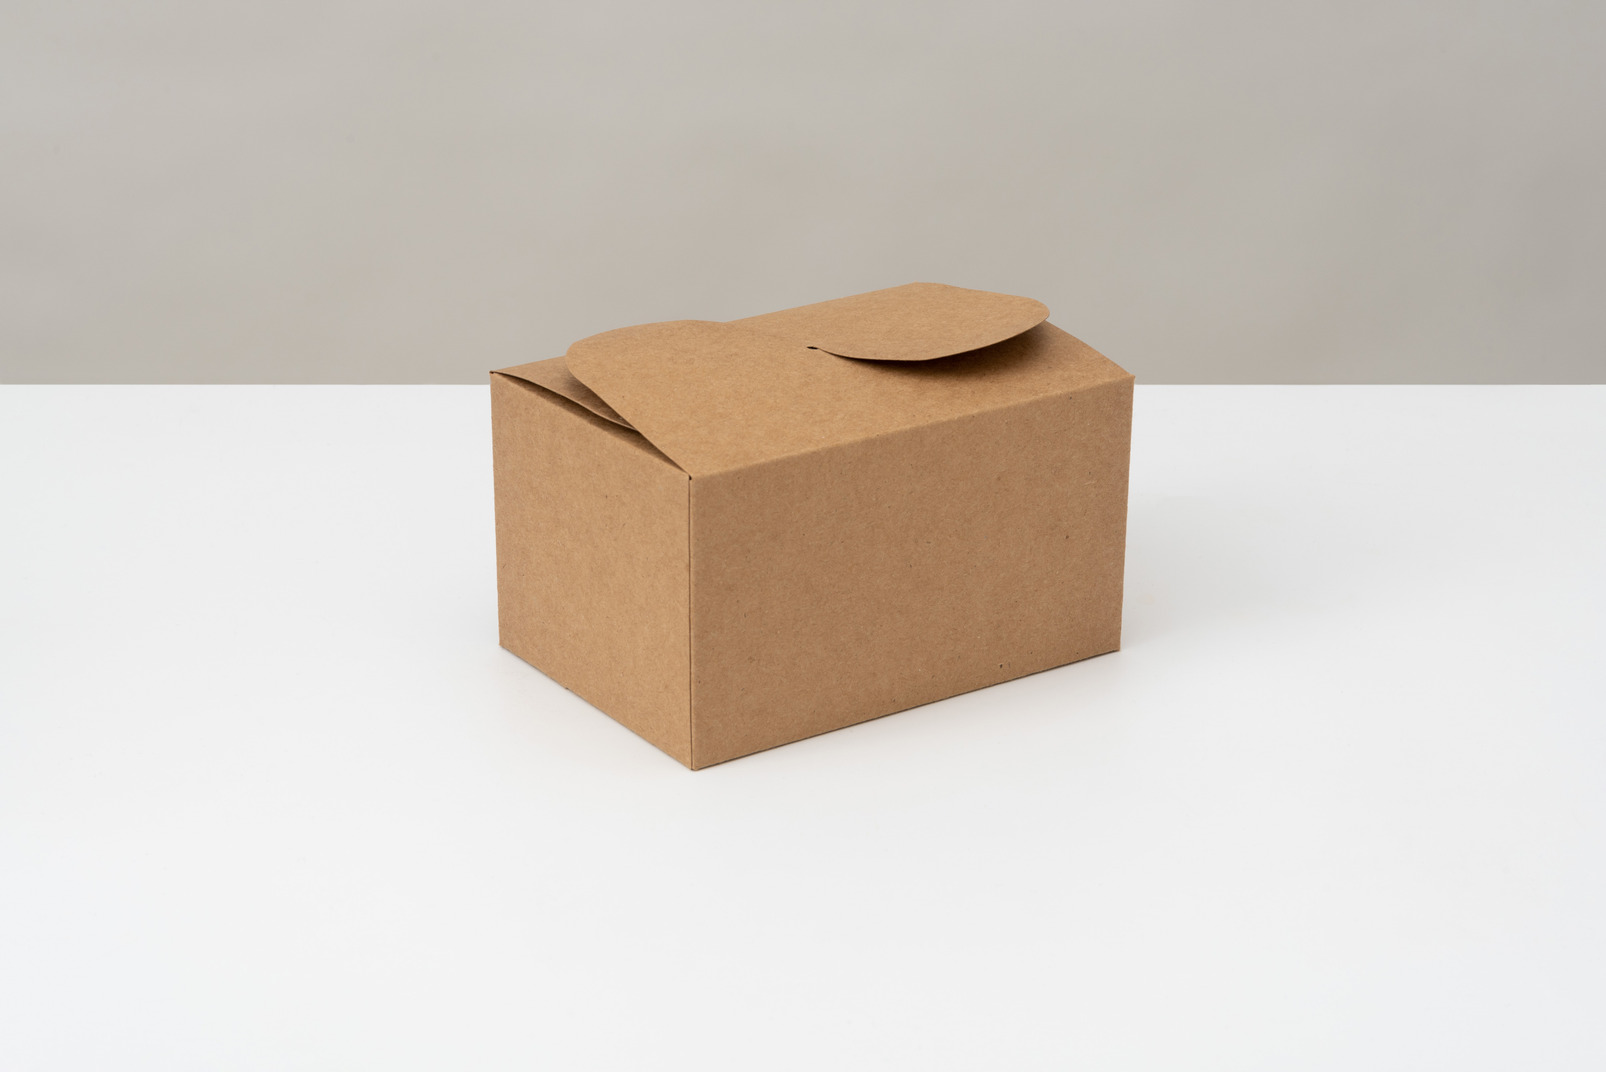 Kraft paper box ready for your design